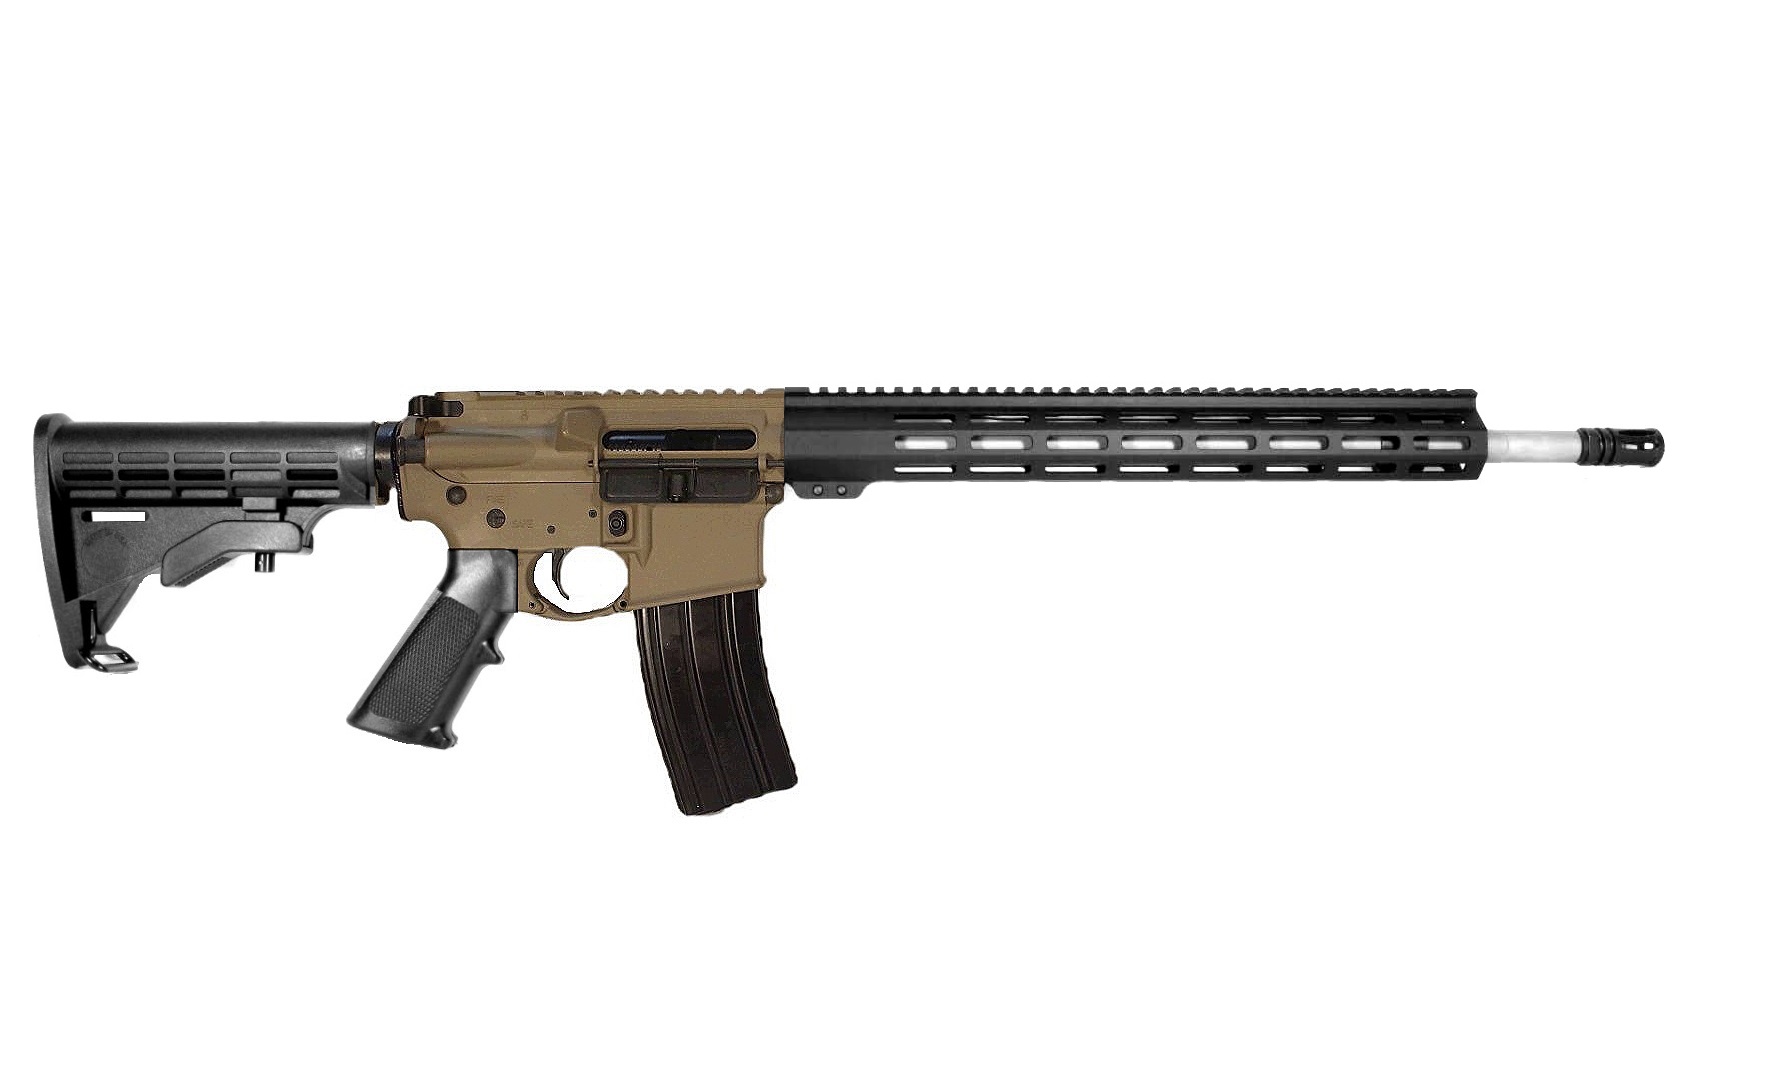 18 inch 223 Wylde Stainless Rifle FDE/BLK 2 TONE